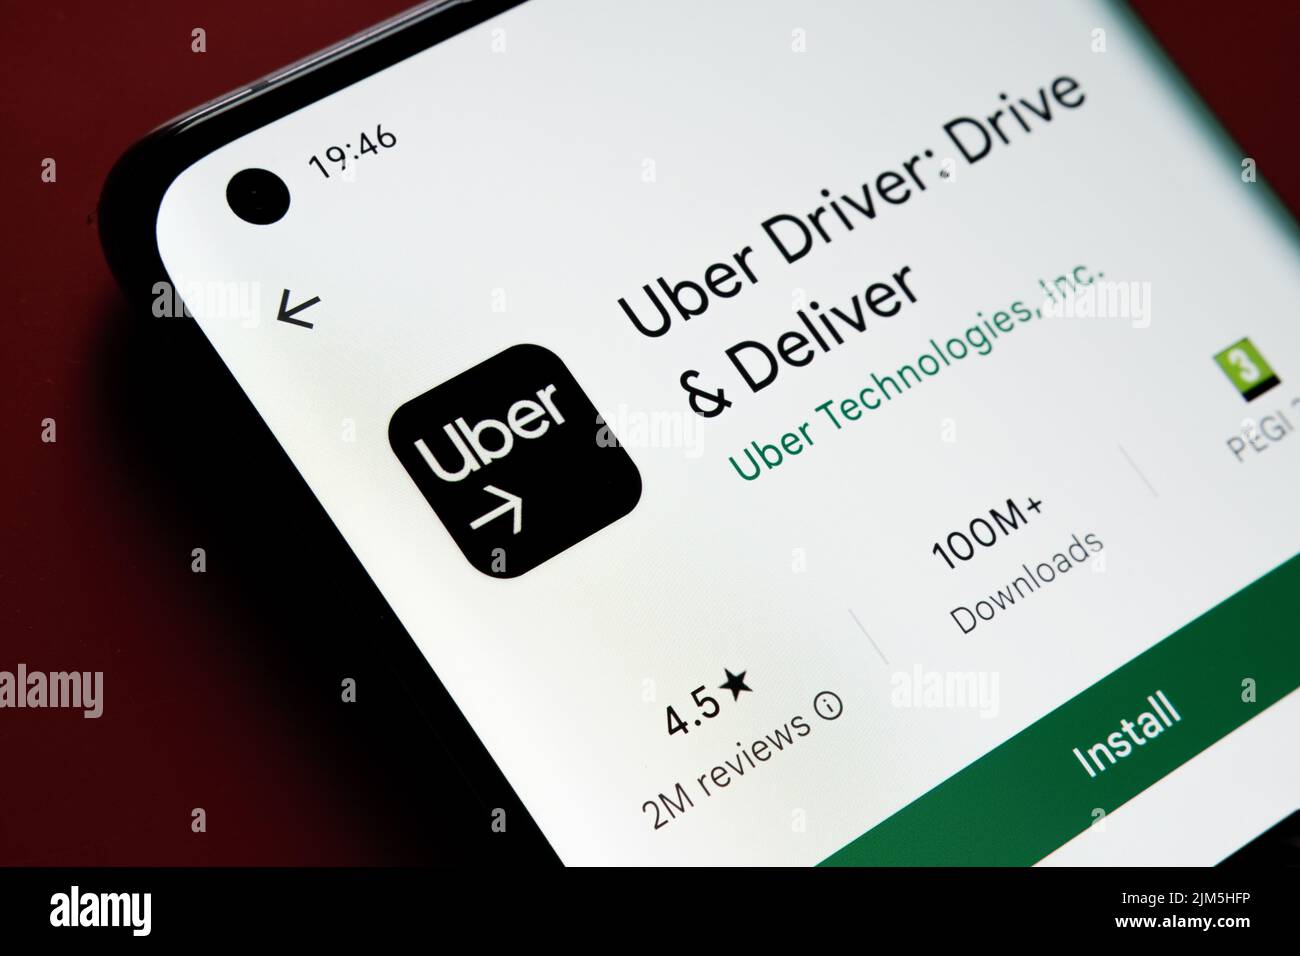 Uber Driver app seen in Google Play Store on the smartphone screen placed on red background. Close up photo with selective focus. Stafford, United Kin Stock Photo